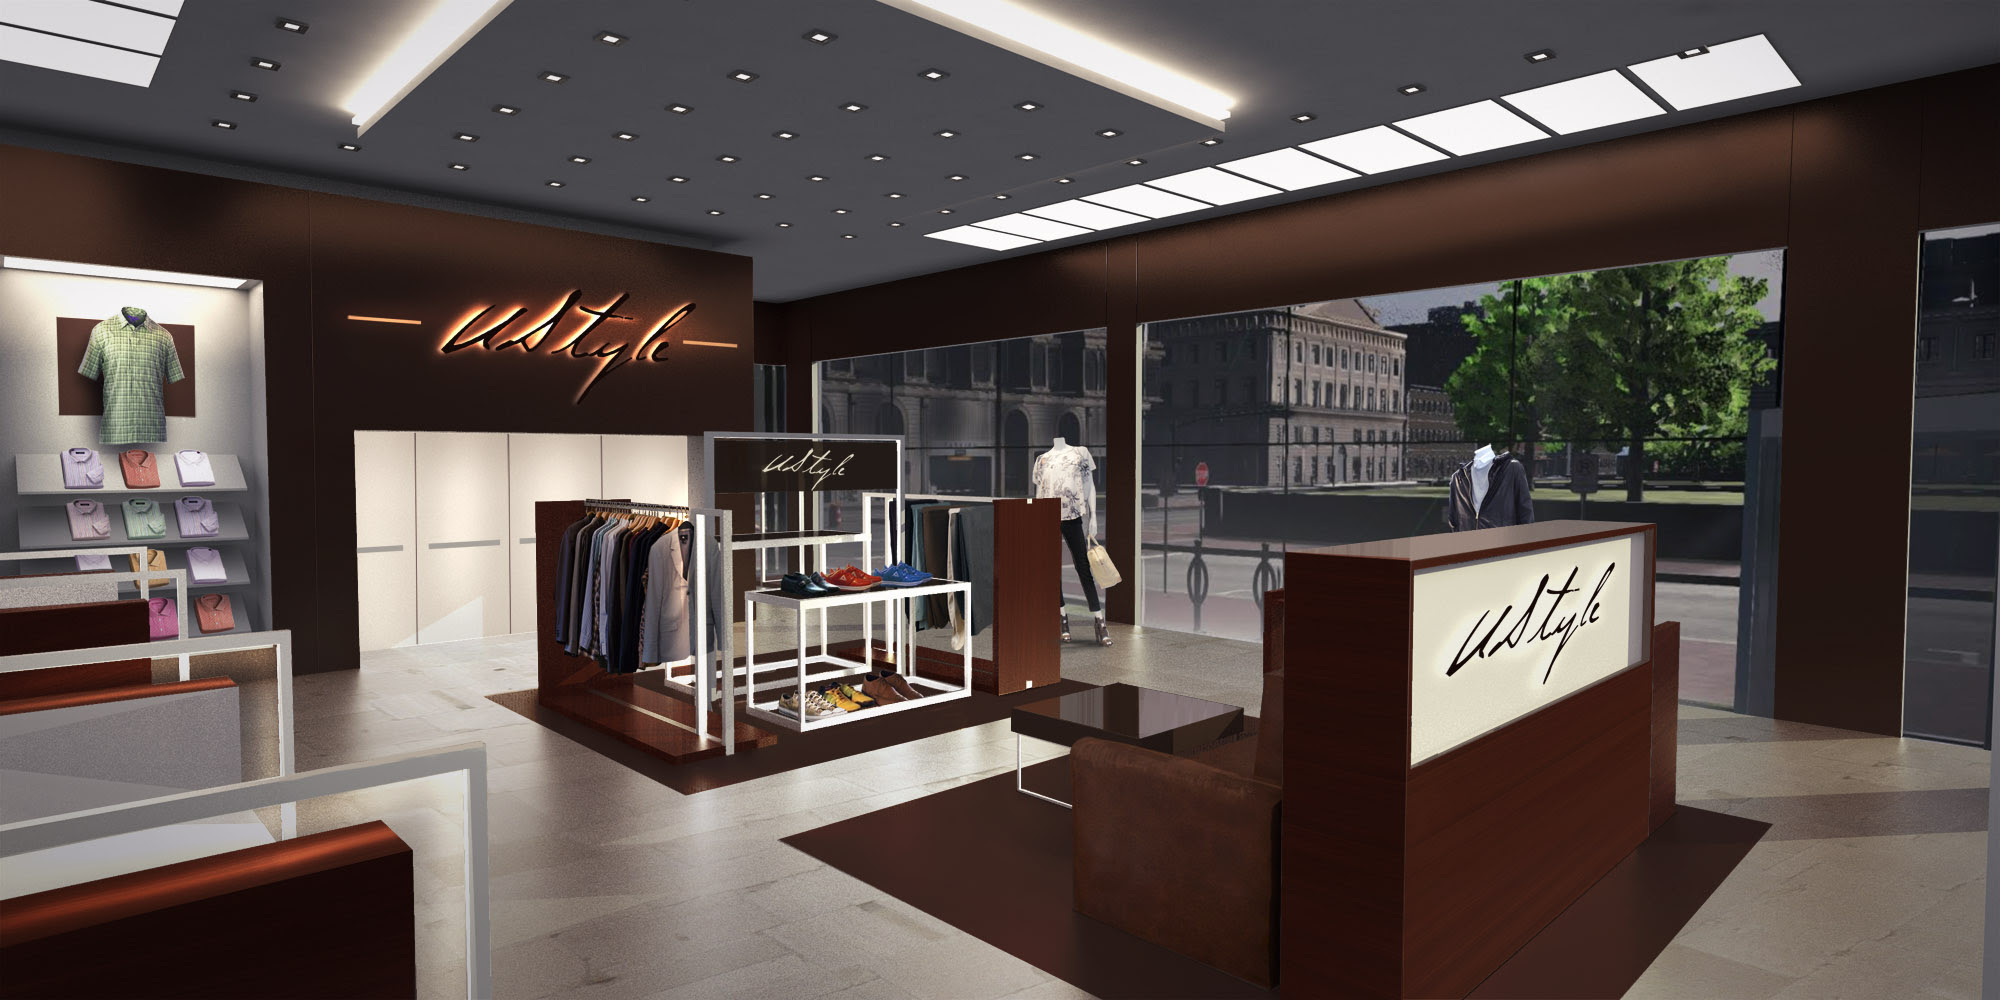 Clothing store concept